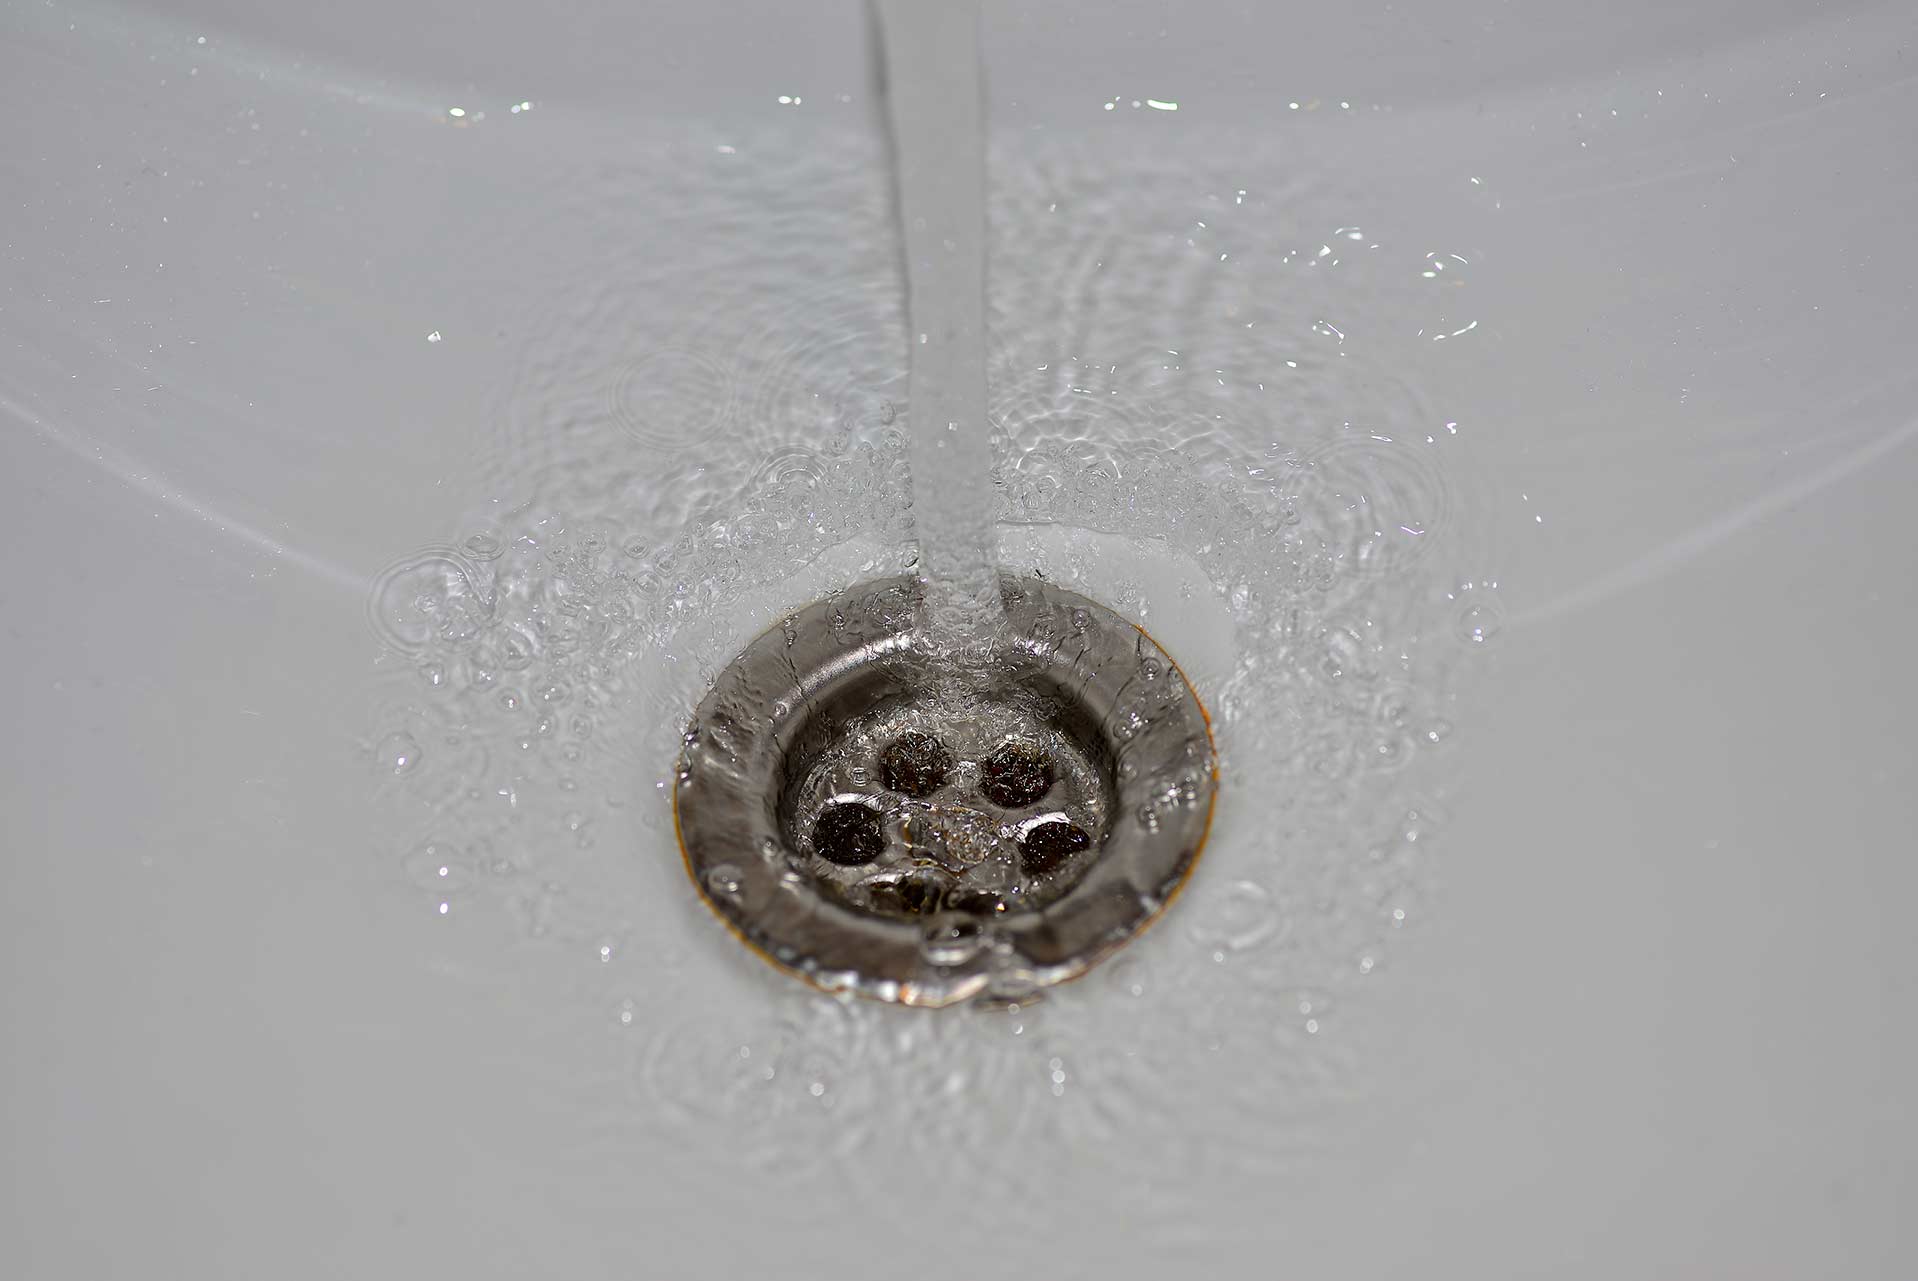 A2B Drains provides services to unblock blocked sinks and drains for properties in Hurstpierpoint.